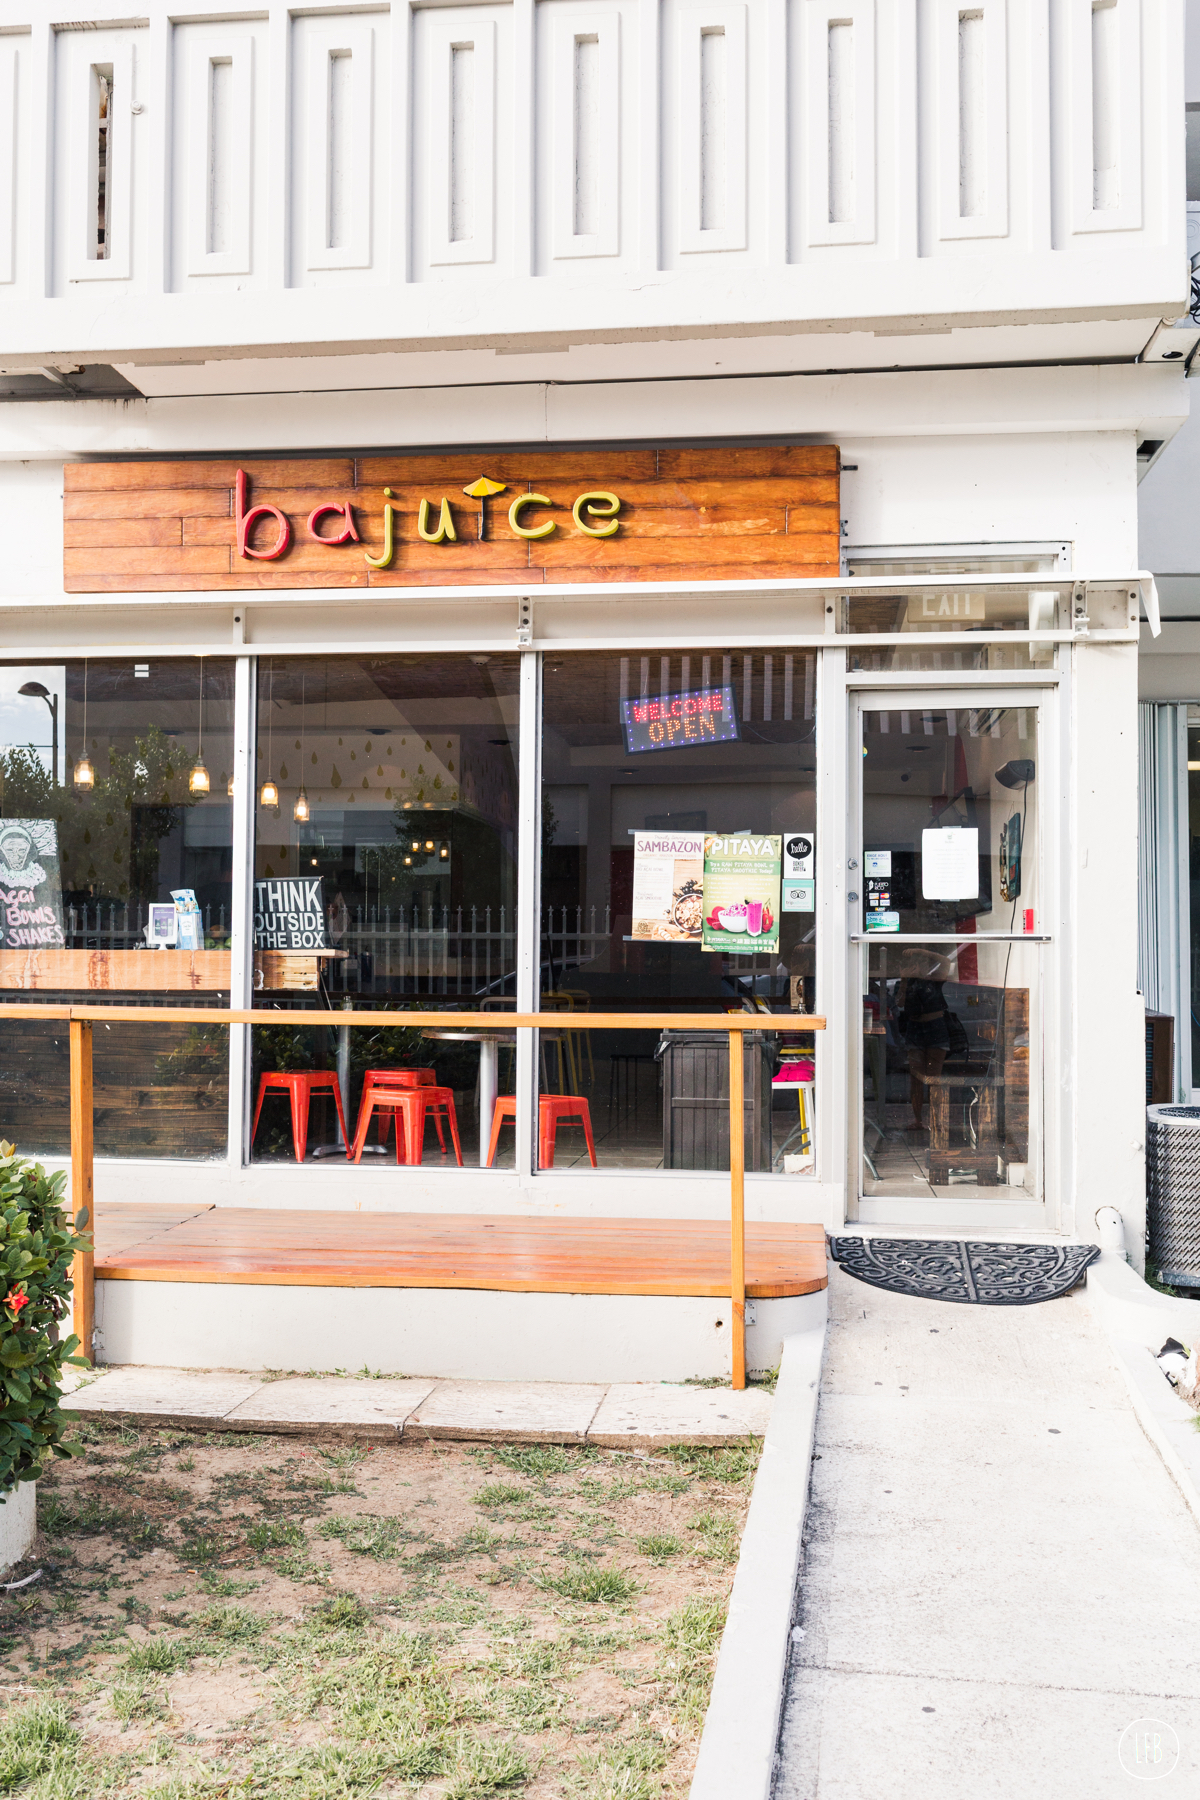 Bajuice in Puerto Rico - photographed by Rae Tashman - lovefromberlin.net